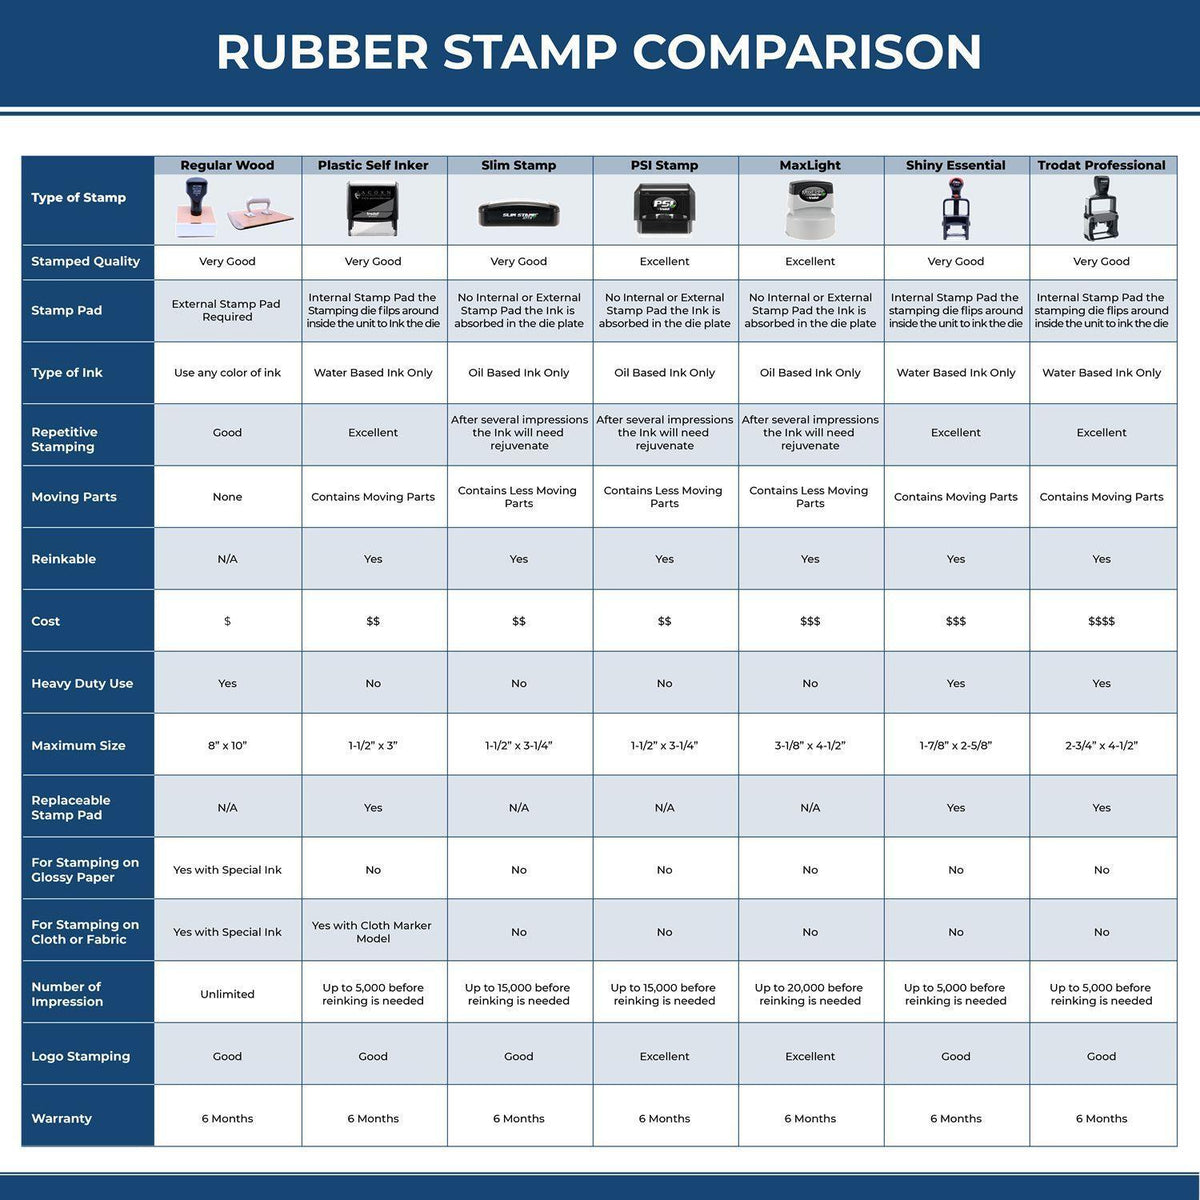 Large Closed Rubber Stamp 4111R Rubber Stamp Comparison